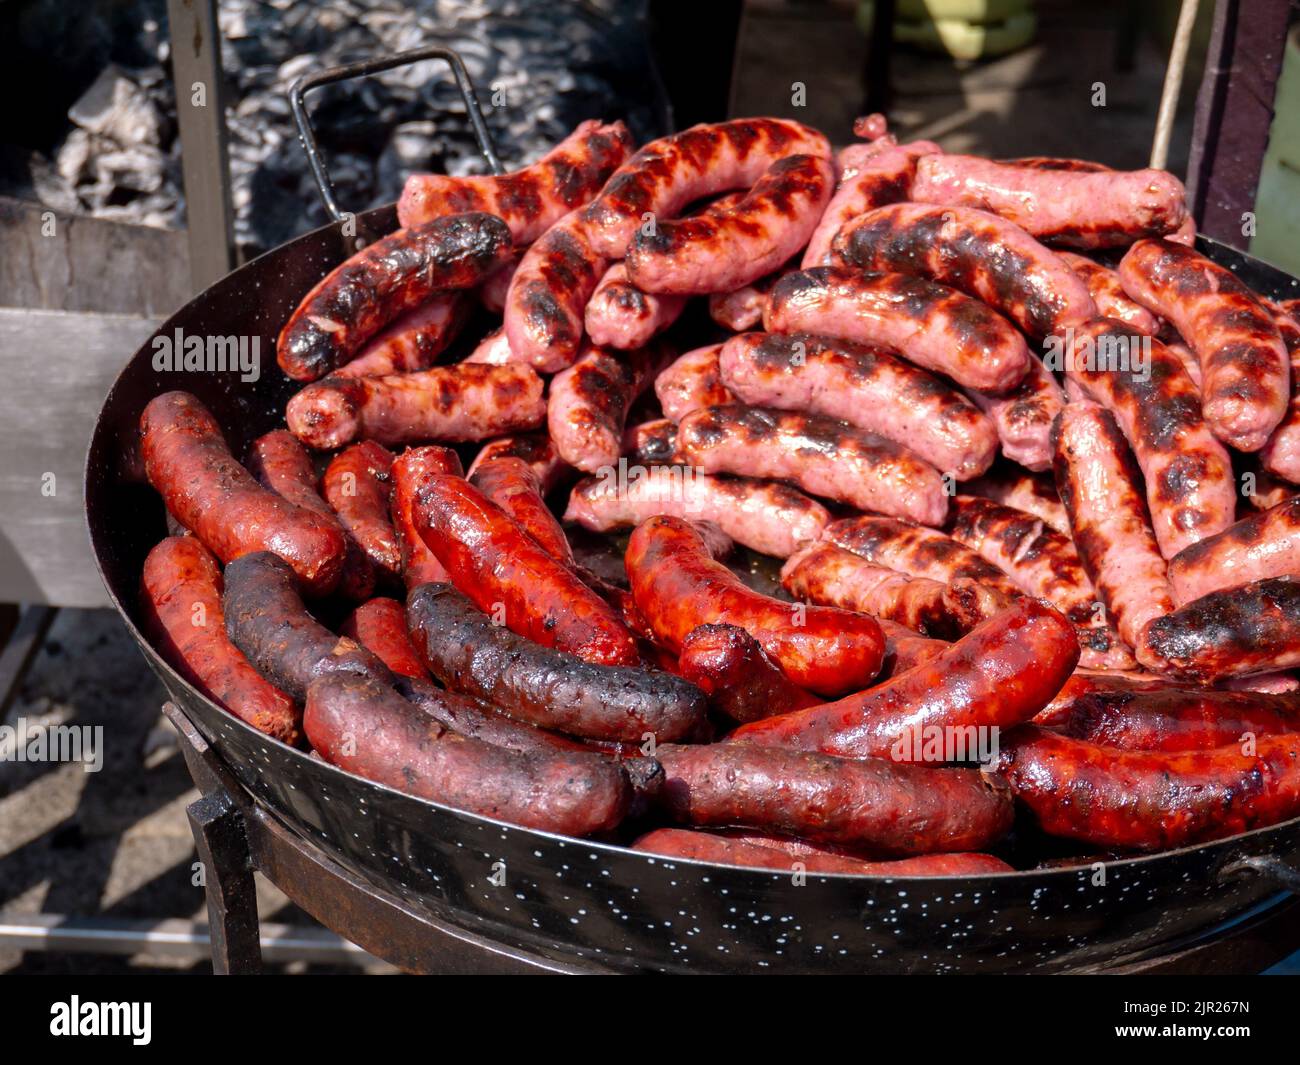 Spanish traditional fresh red and white sausages in the frying pan at the street market Stock Photo